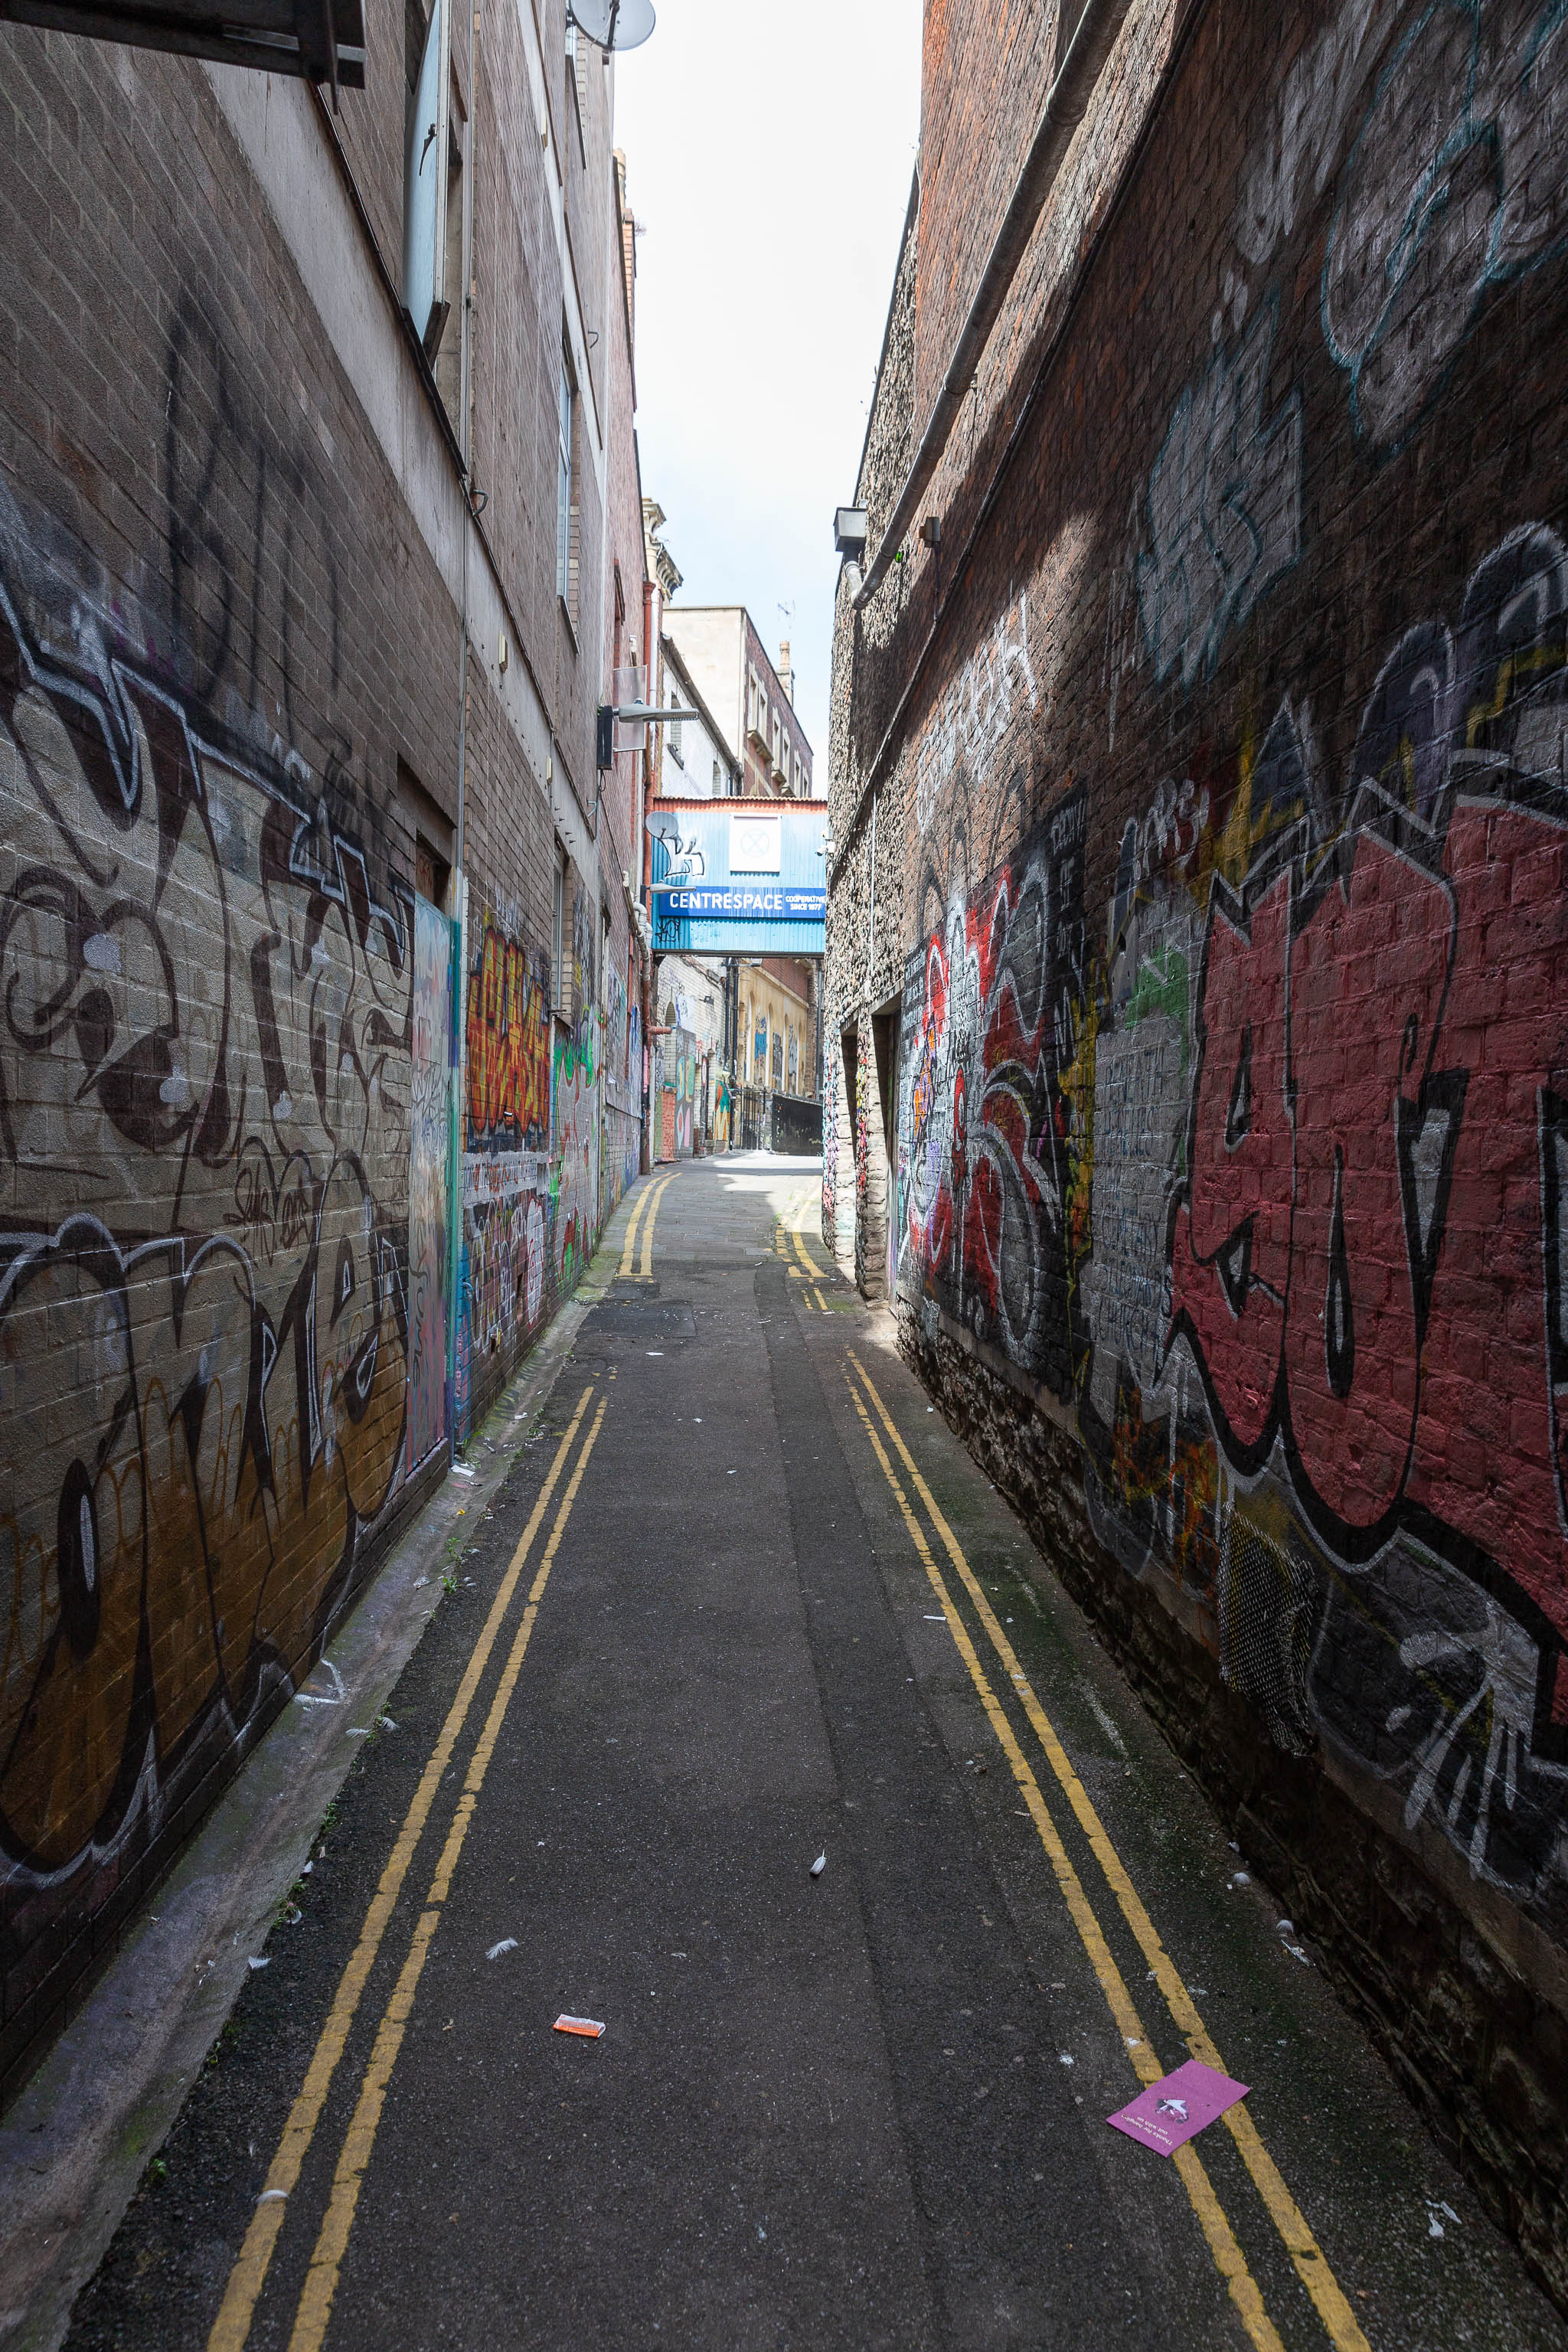 Alley
Nevertheless, let's head down to Centrespace.
